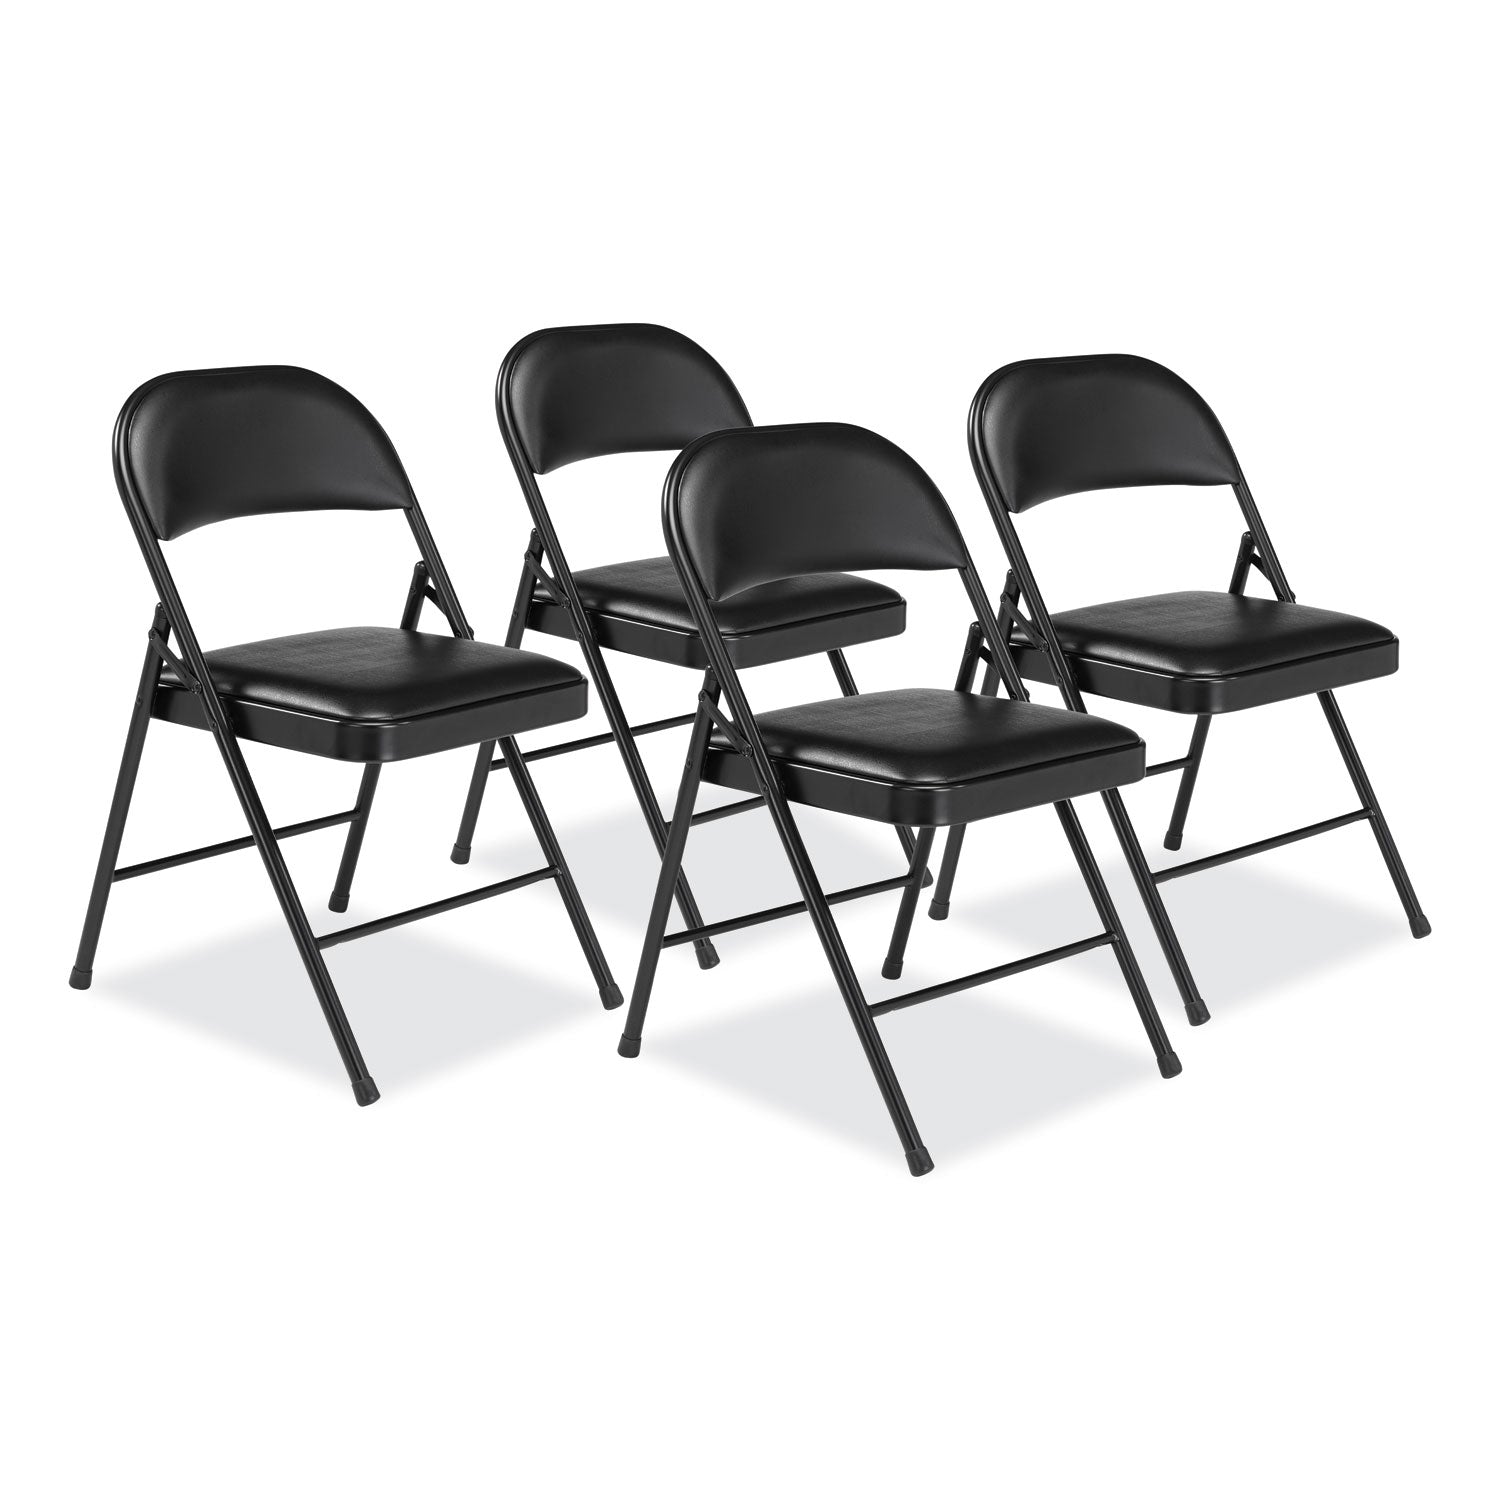 950-series-vinyl-padded-steel-folding-chair-supports-up-to-250-lb-1775-seat-height-black-4-cartonships-in-1-3-bus-days_nps950 - 1